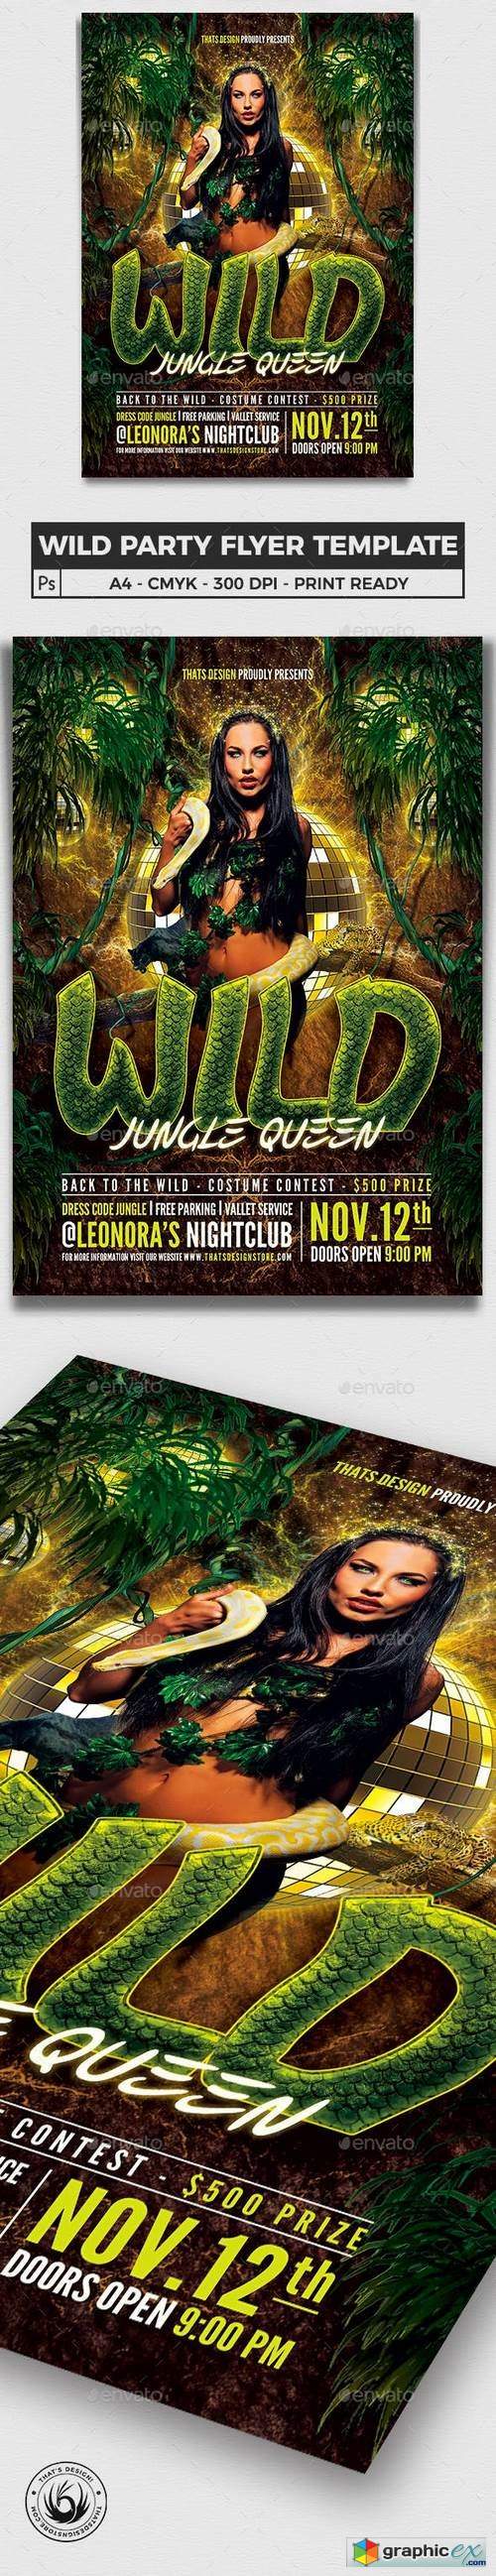 Wild Party Flyer Template 6382383